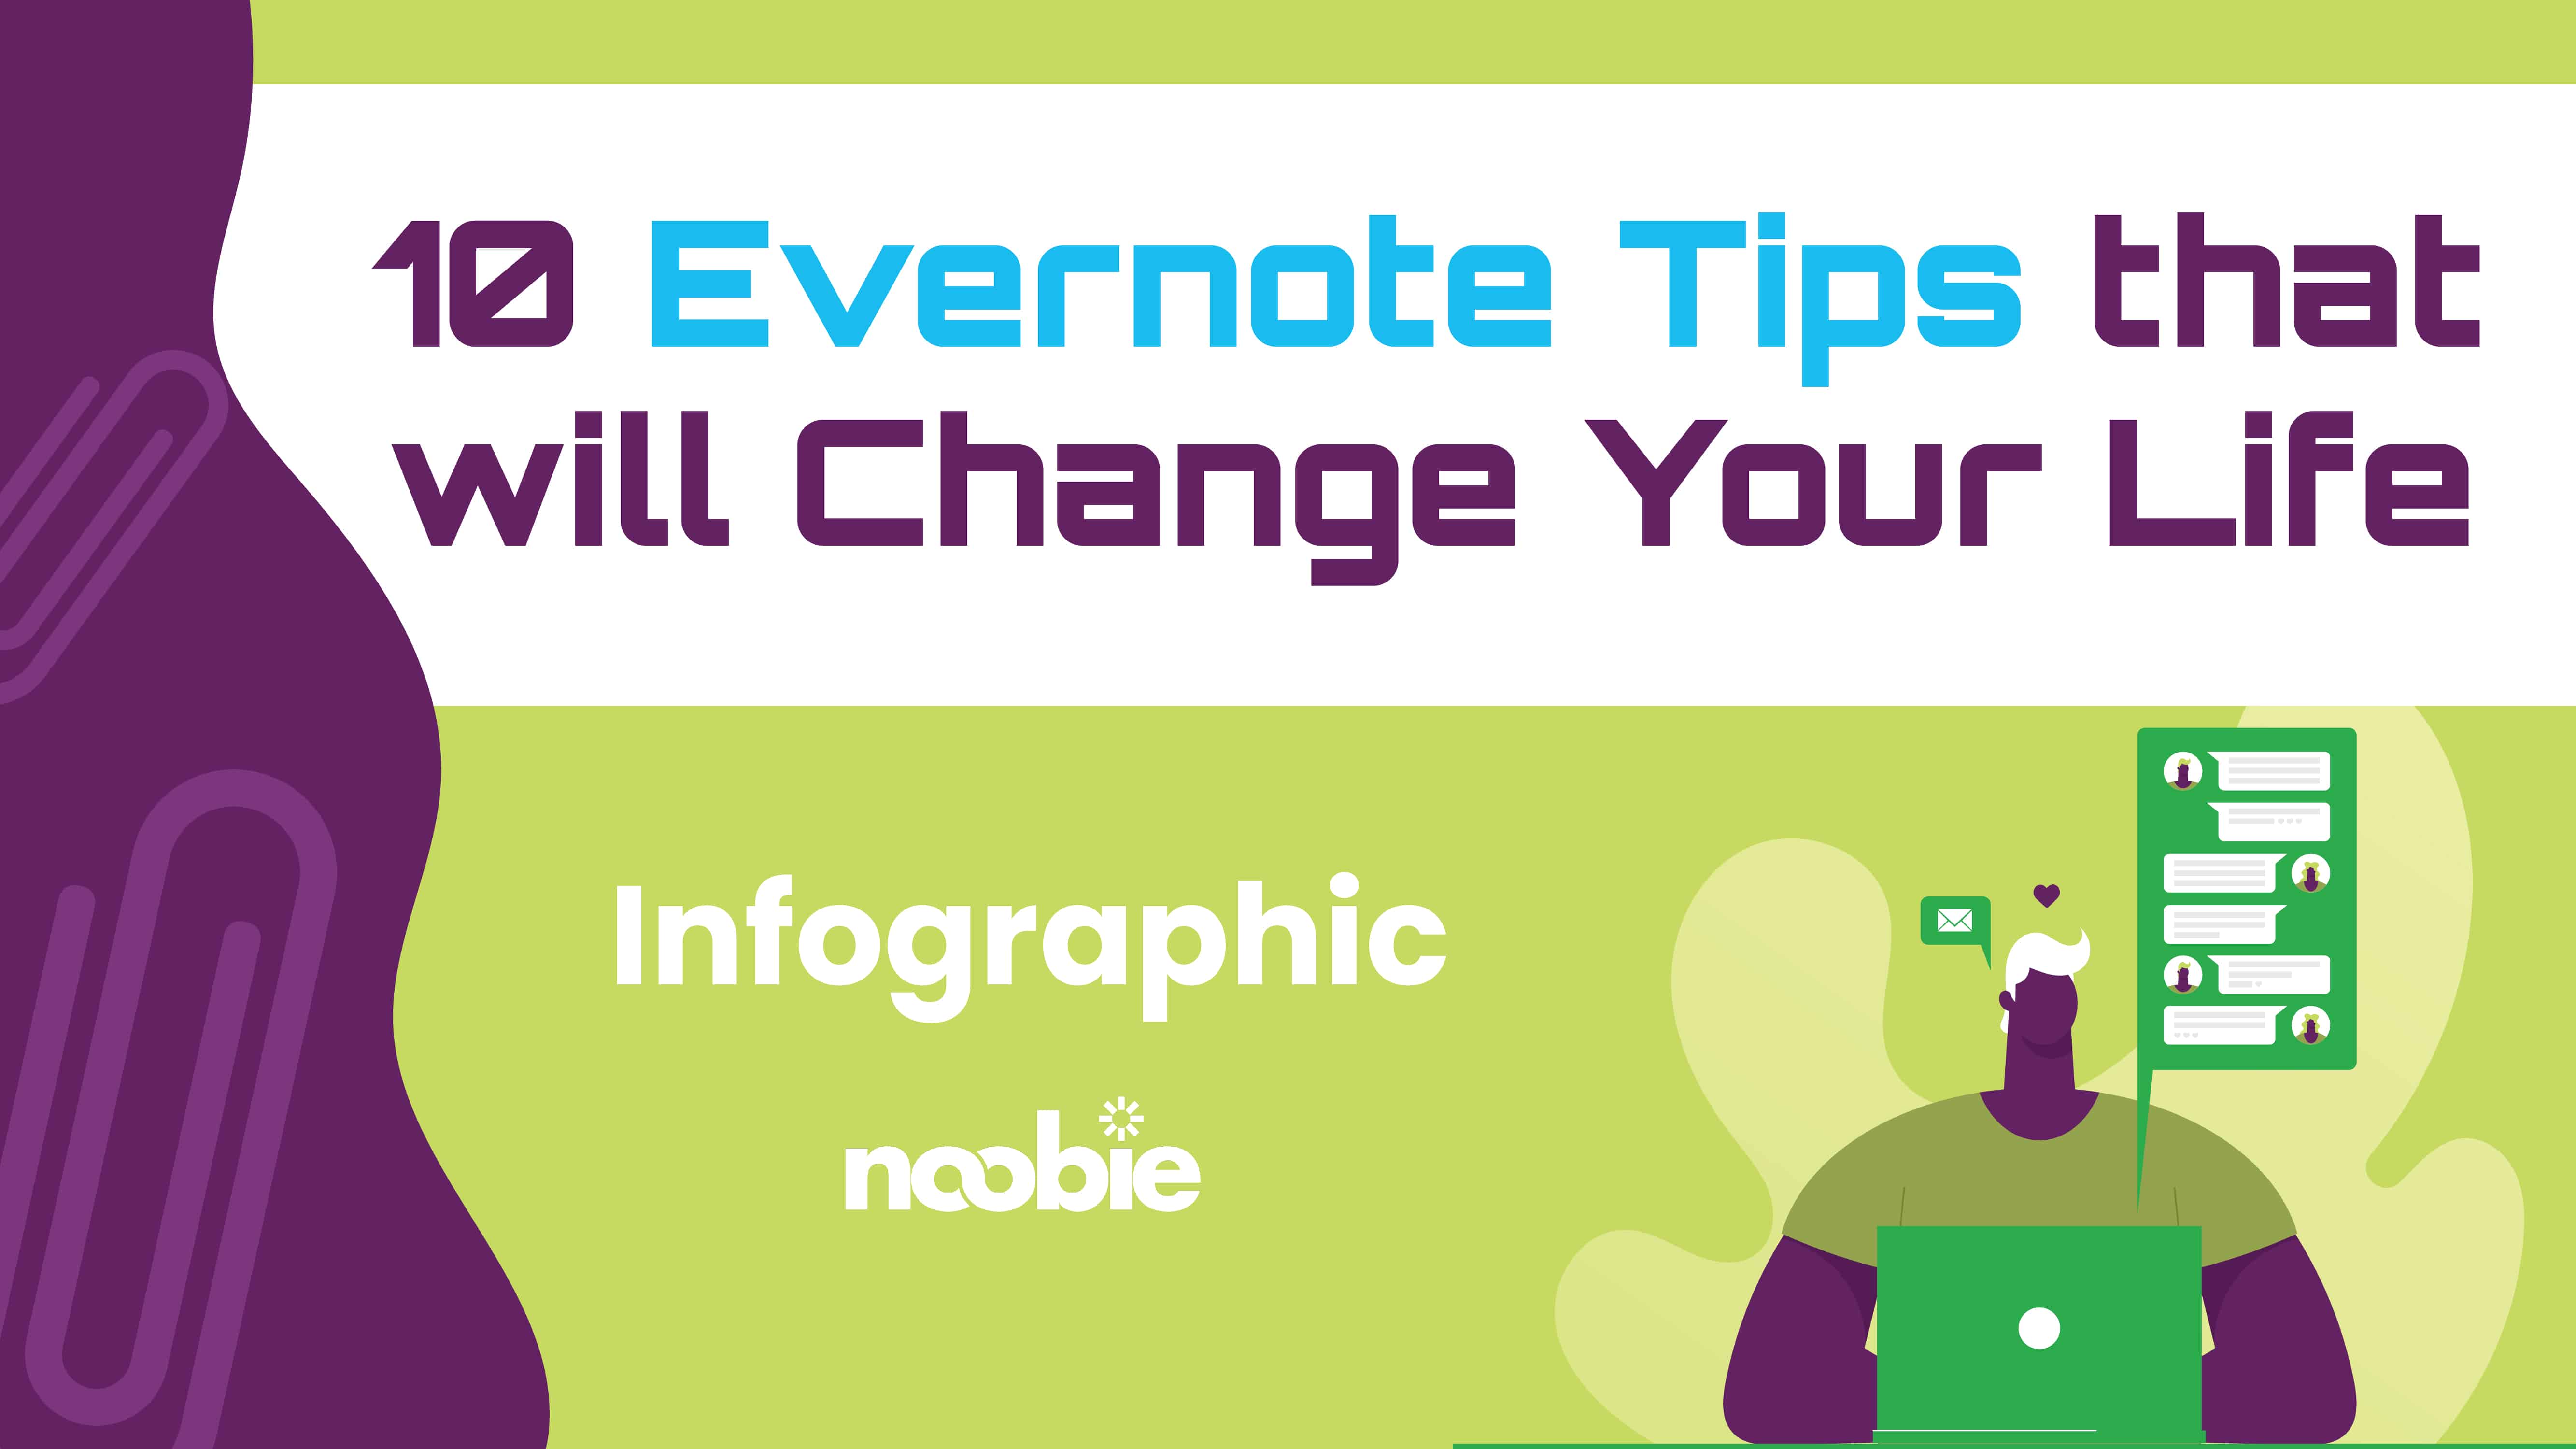 10 Evernote Tips & Tricks You Should Master [INFOGRAPHIC]